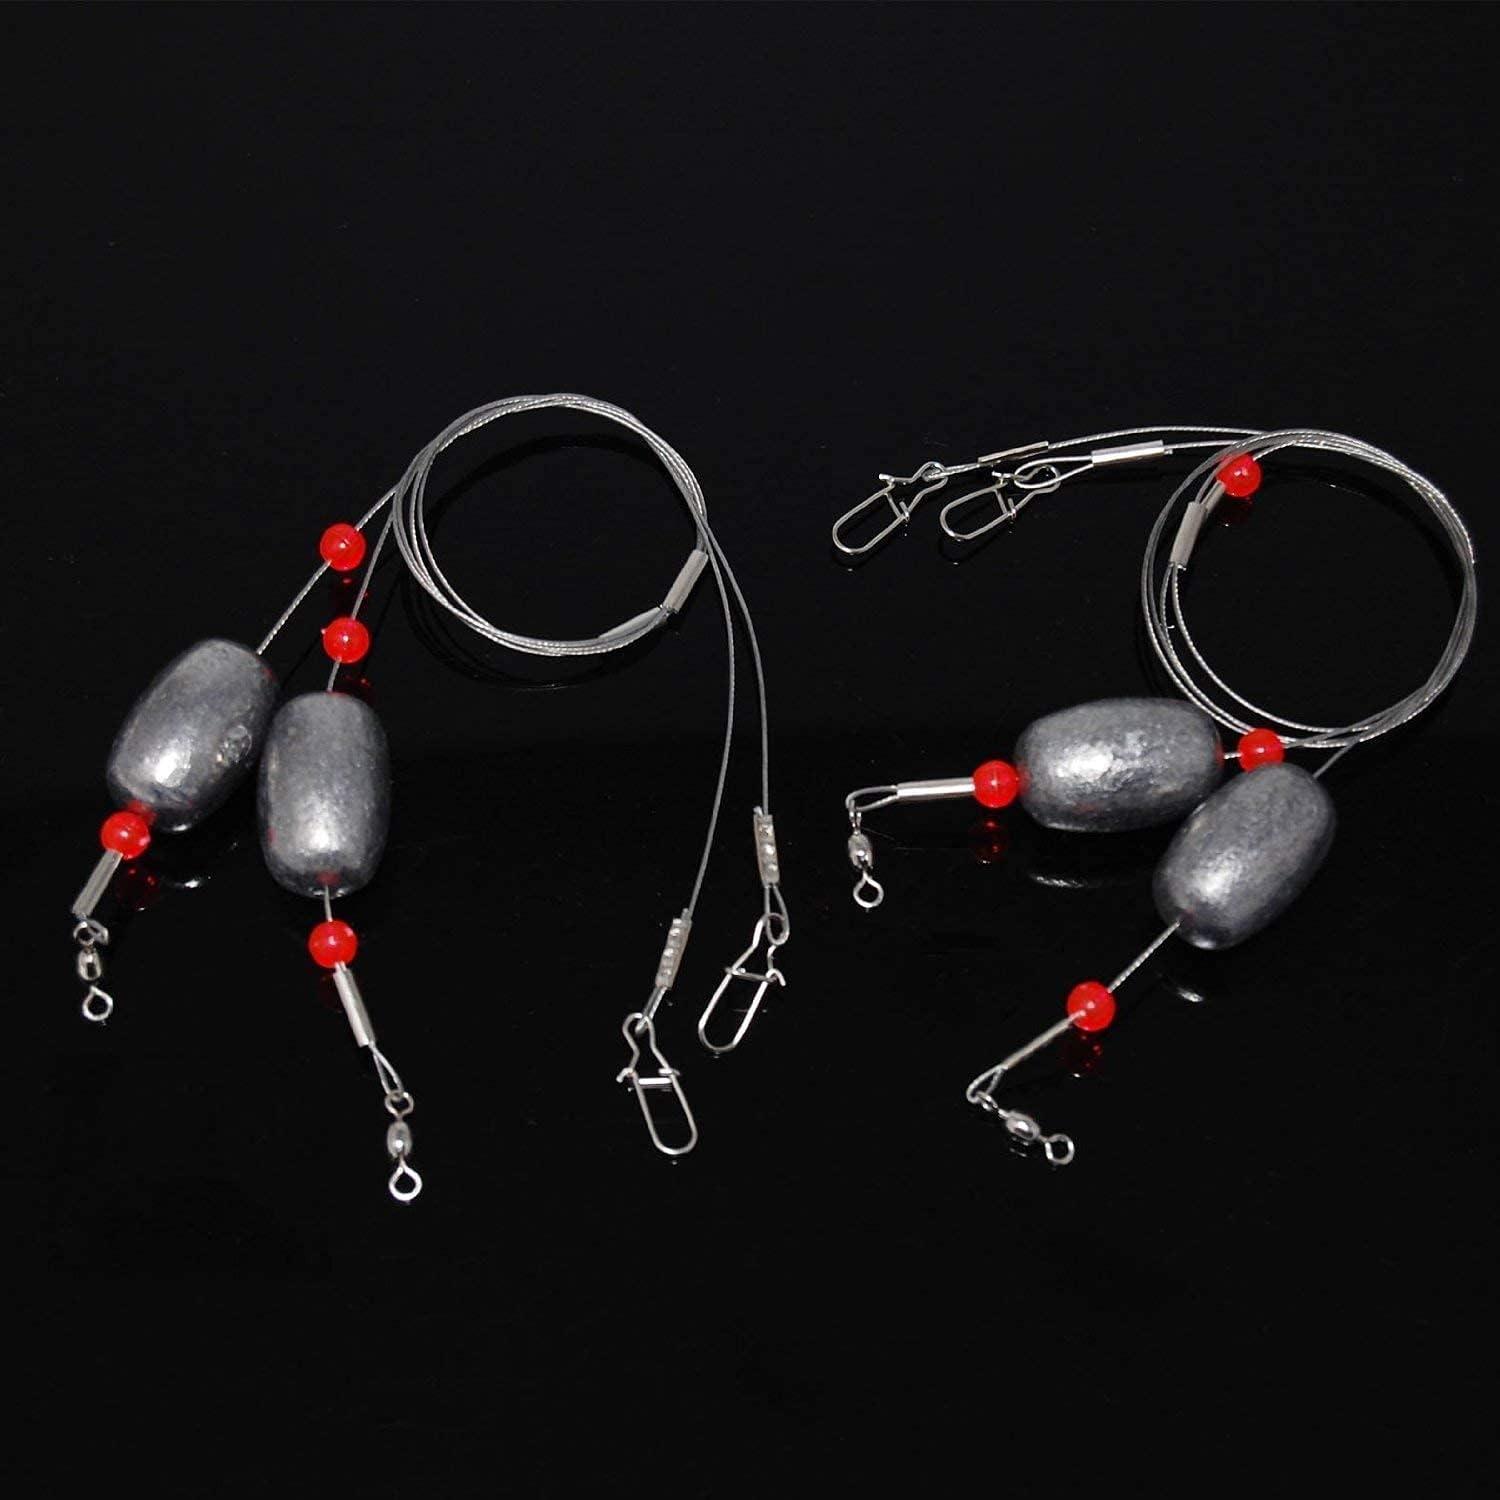 Fishing Egg Sinker Rigs Catfish Rig Ready Rigs with Sinker Jetty Rig  Flounder rig Fishing Grouper Rigs Swivel Stainless Steel Fishing Leader  Wire for Trout Drum Redfish and Bottom Fishing 4/8pcs 1